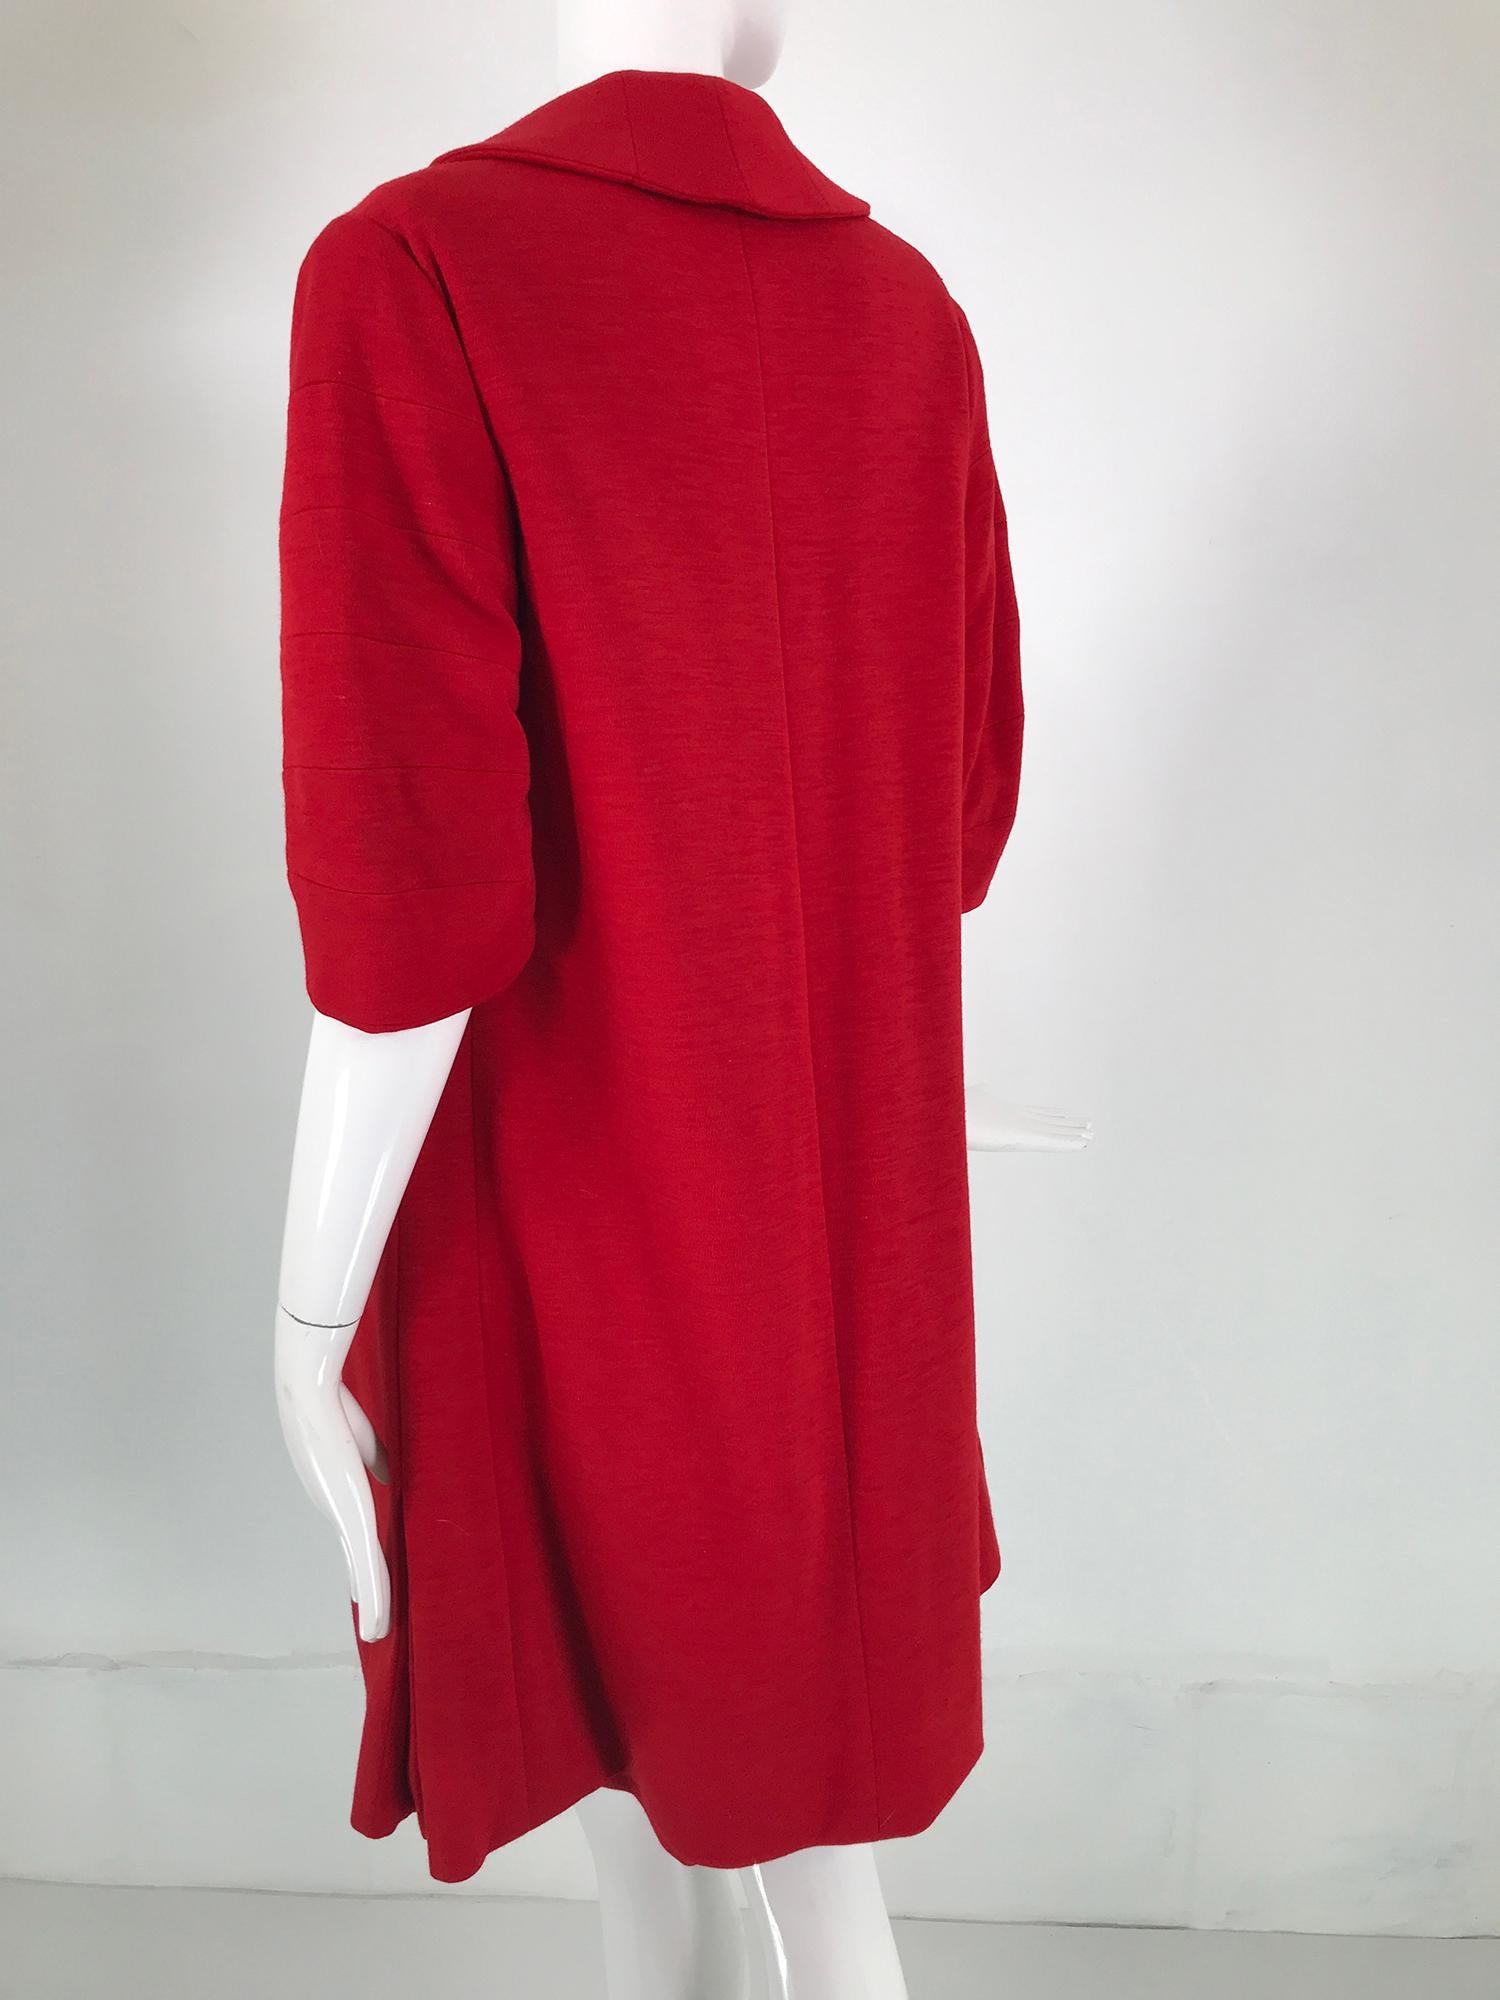 Rouge Coco Chanel Red Haute Couture 1950s 2 pc Wool Jersey Jewel Button Dress & Coat  en vente